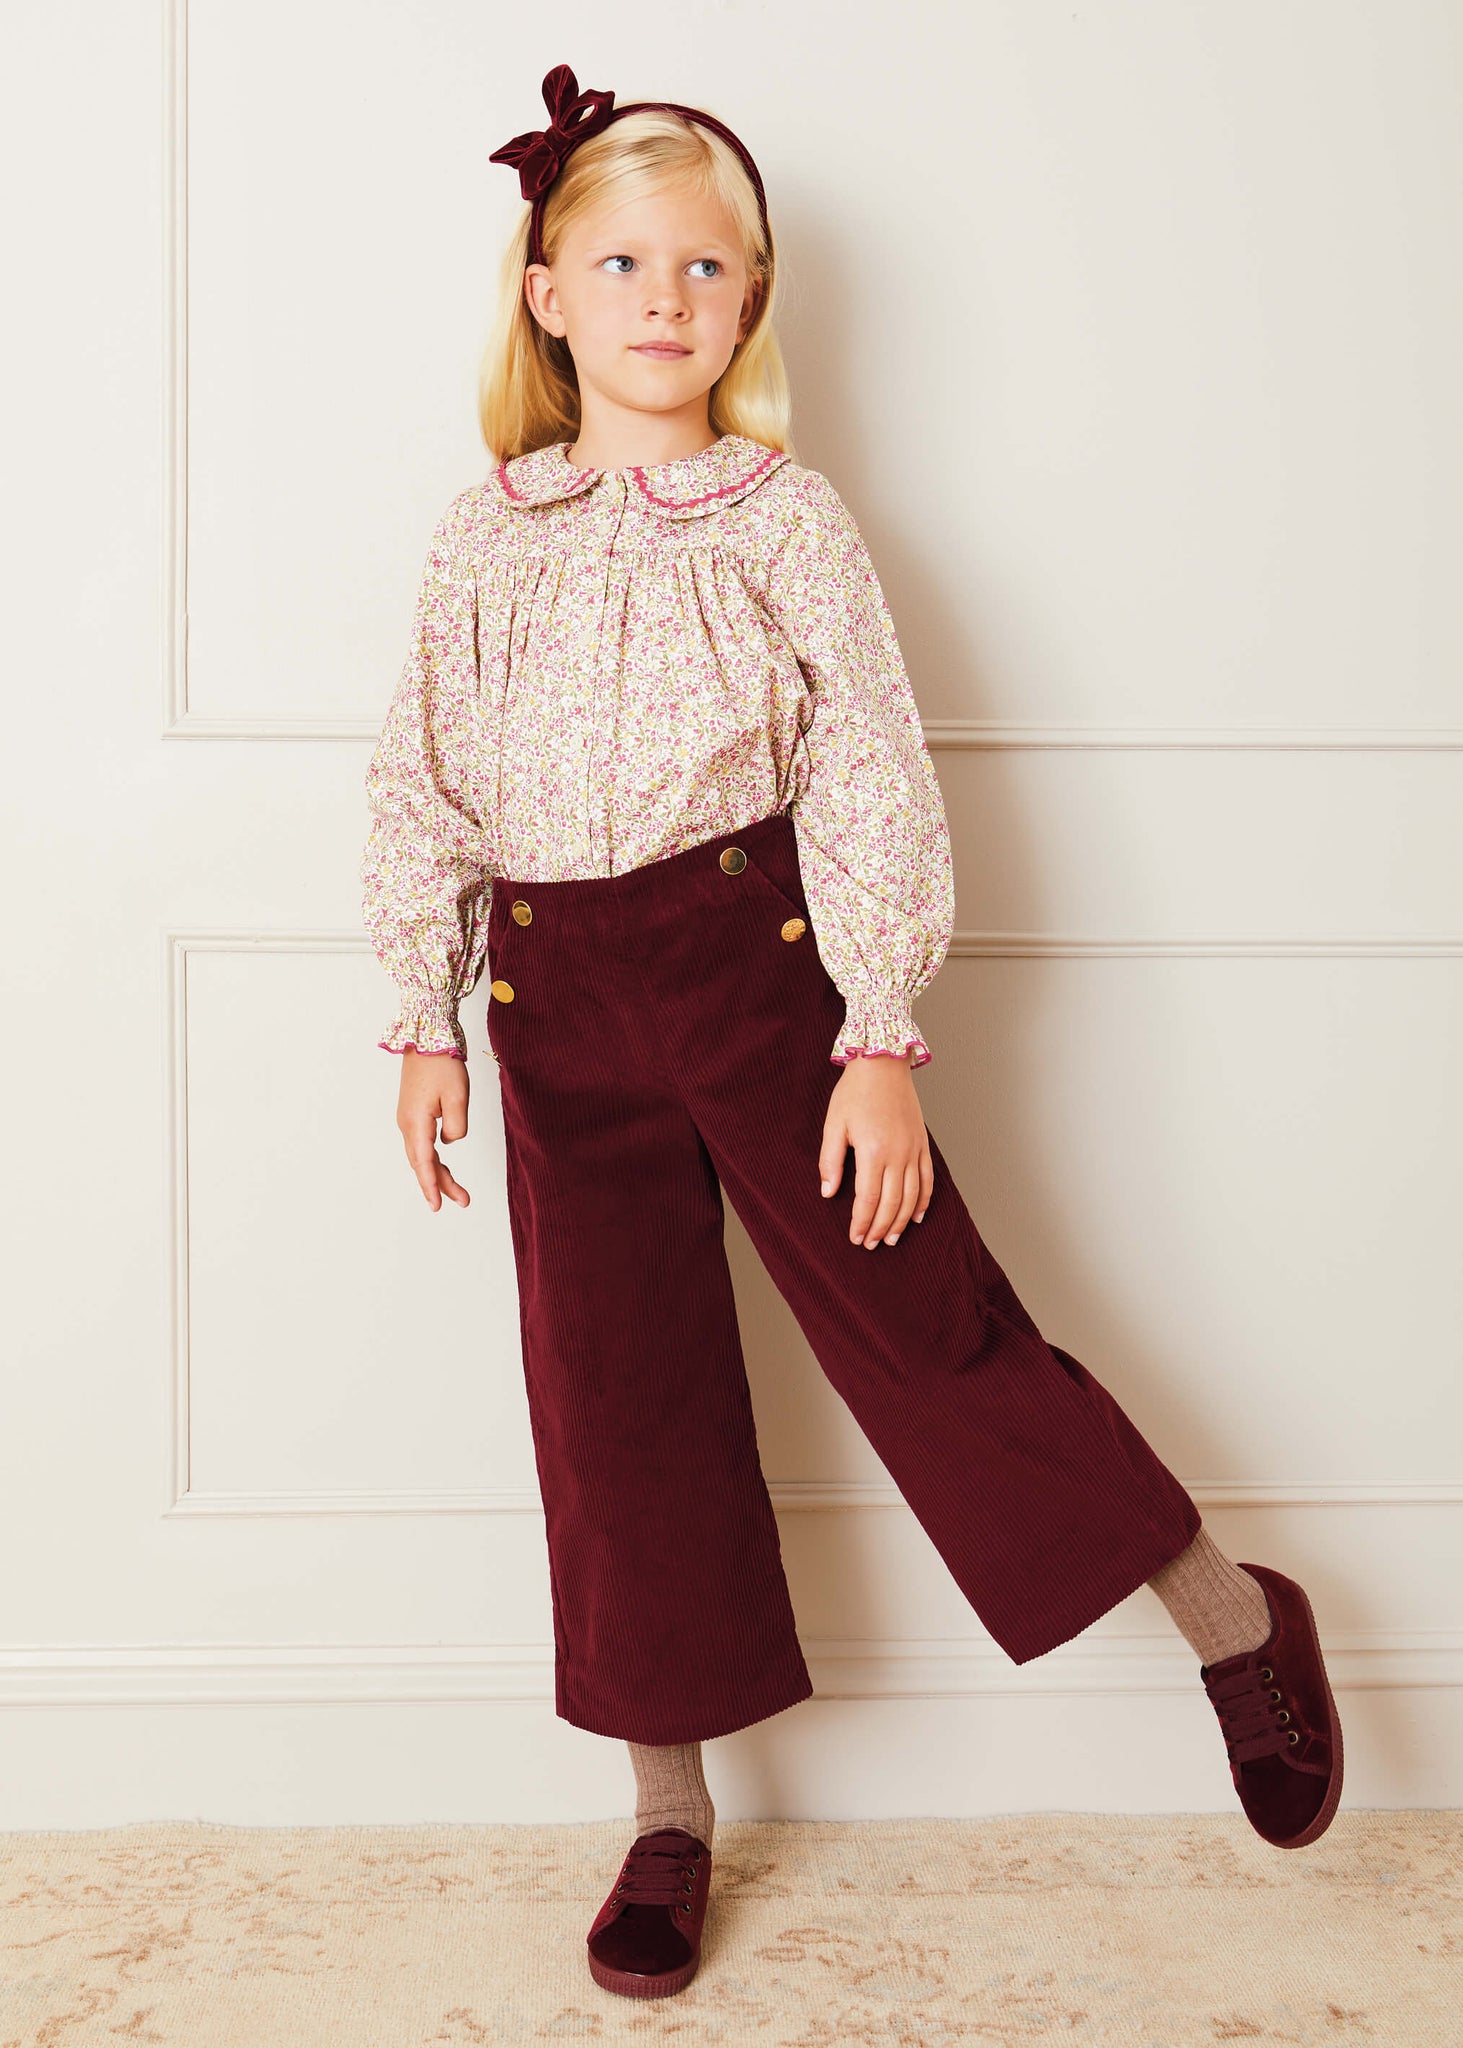 Corduroy Wide Leg Gold Button Trousers in Burgundy (4-10yrs) Trousers  from Pepa London